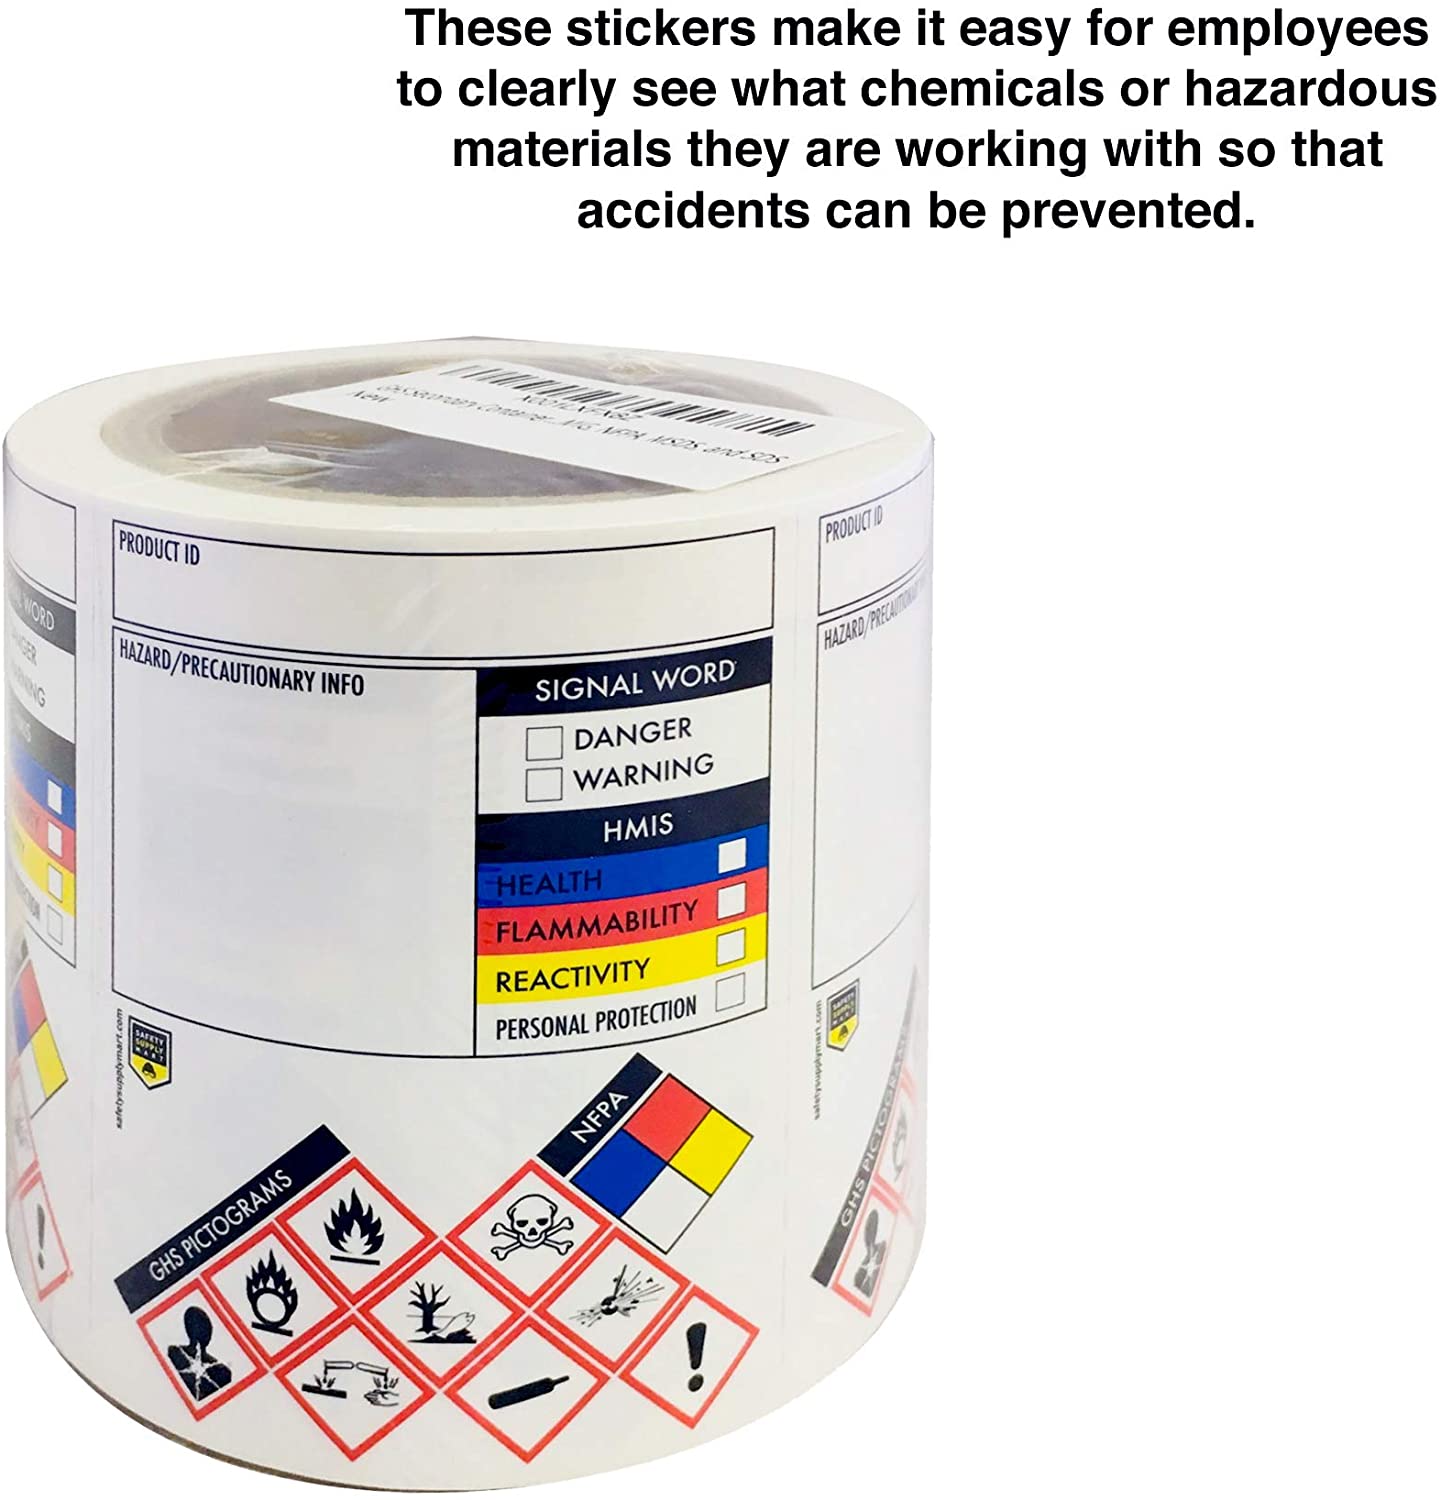 Safety Data Sheet Stickers/MSDS Stickers, 3" x 4", Tough Tear-Proof, Right To Know- Chemical Identifying and Marking Sticker Decals - Roll of 250